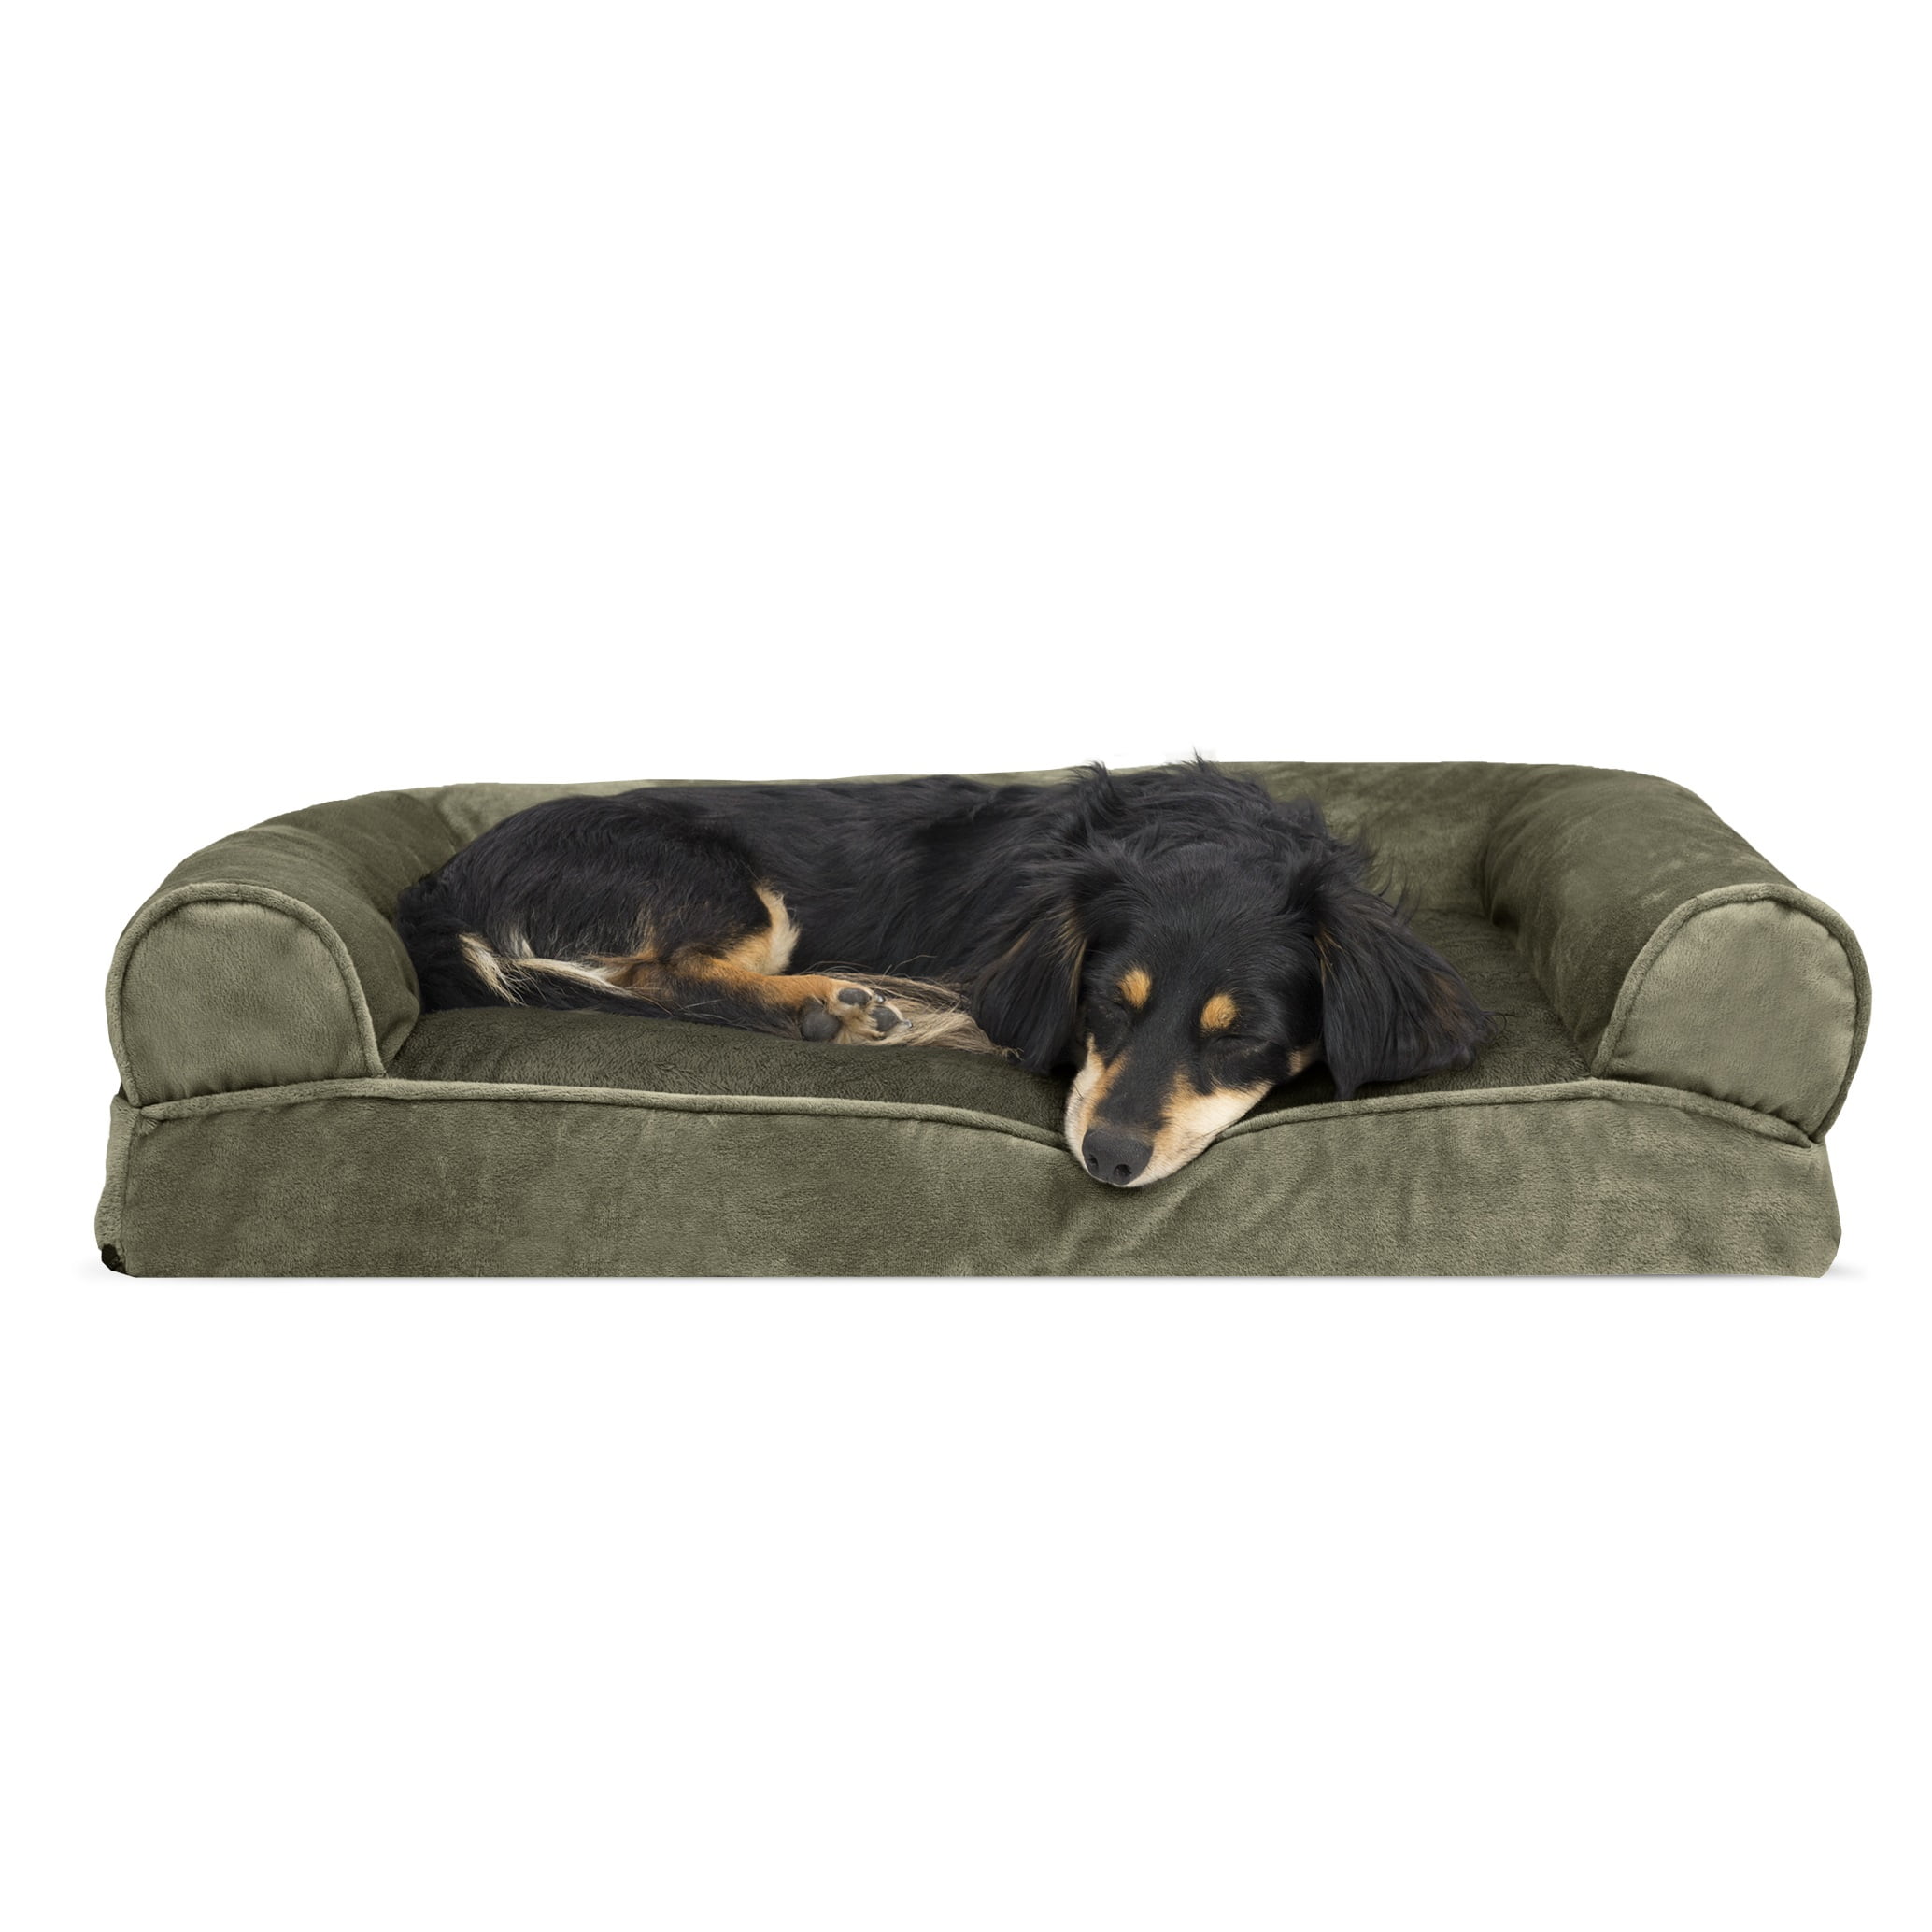 Available in Multiple Colors & Styles Orthopedic L Shaped Chaise Lounge Sofa-Style Living Room Corner Couch Pet Bed w/ Removable Cover for Dogs & Cats Furhaven Pet Dog Bed 